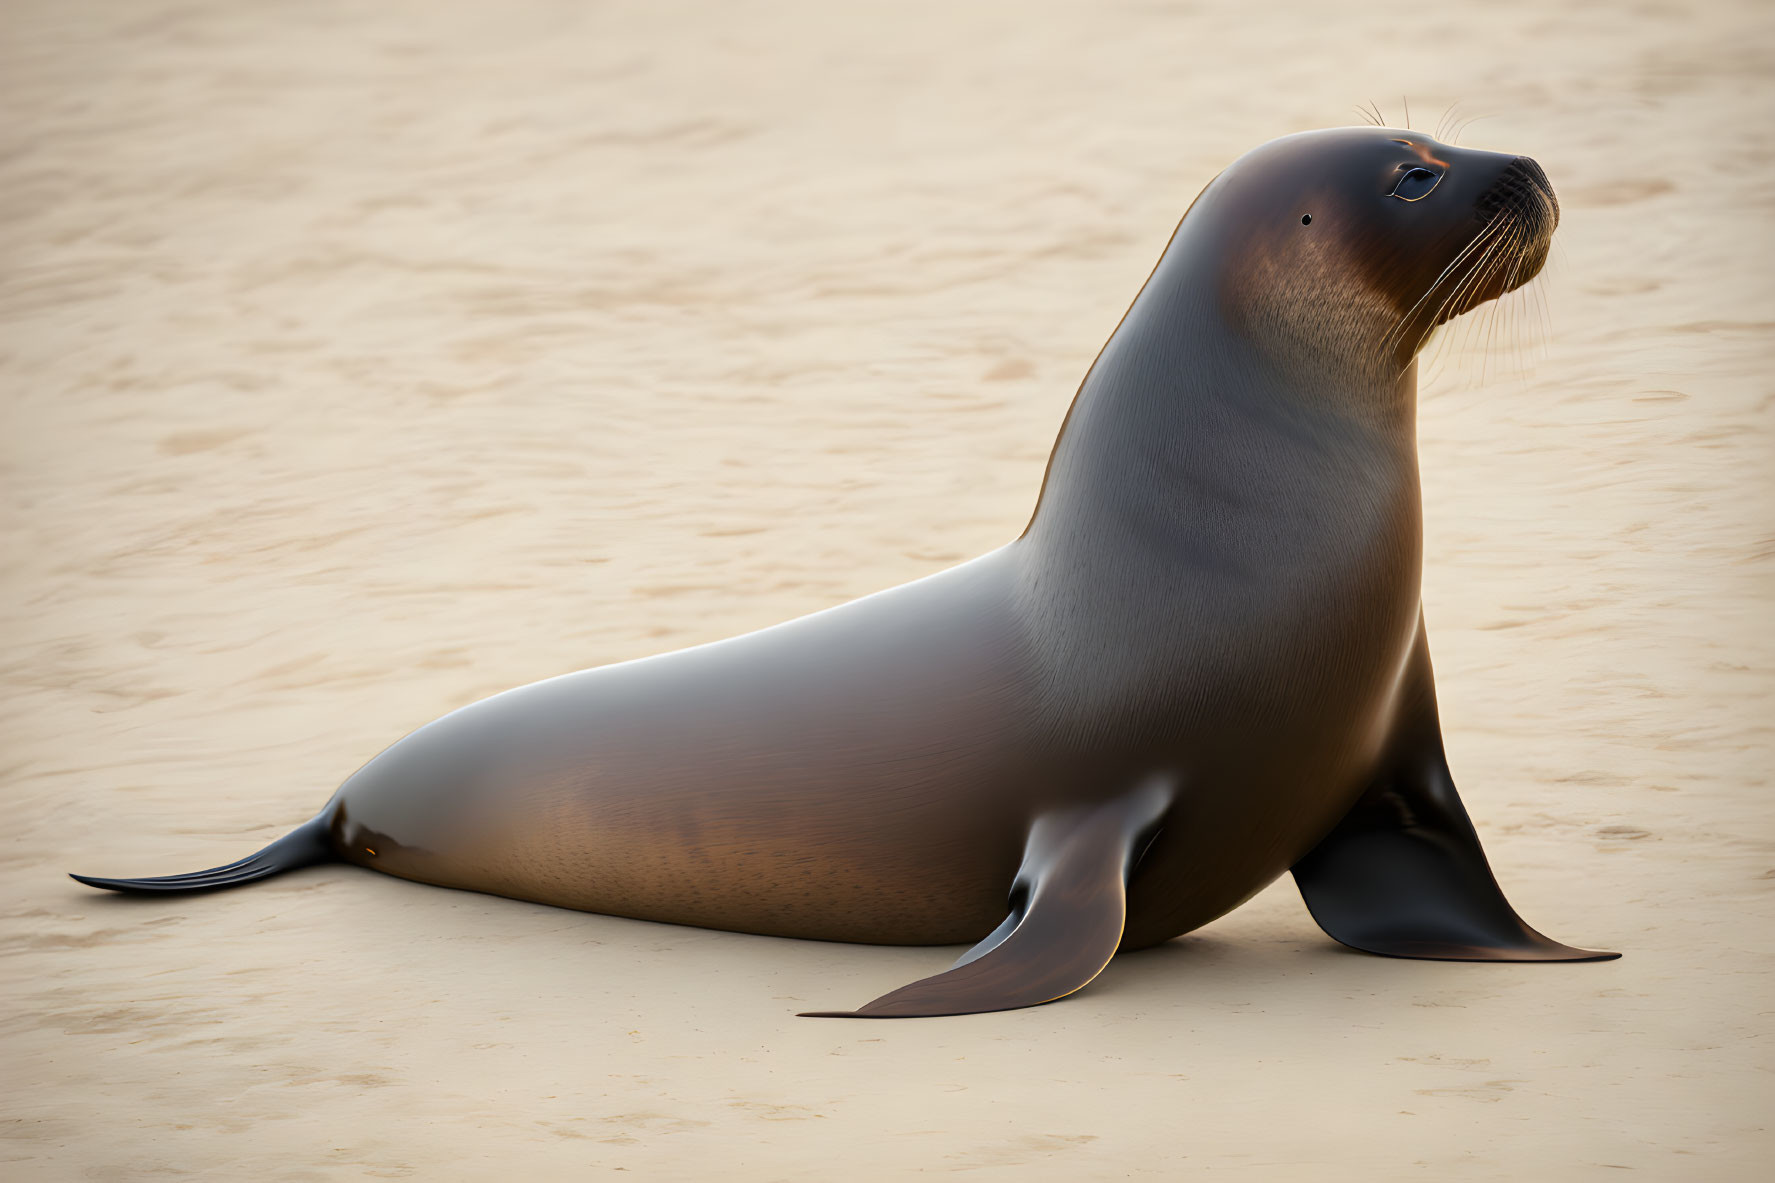  The seal is a glossy brown wood with a background